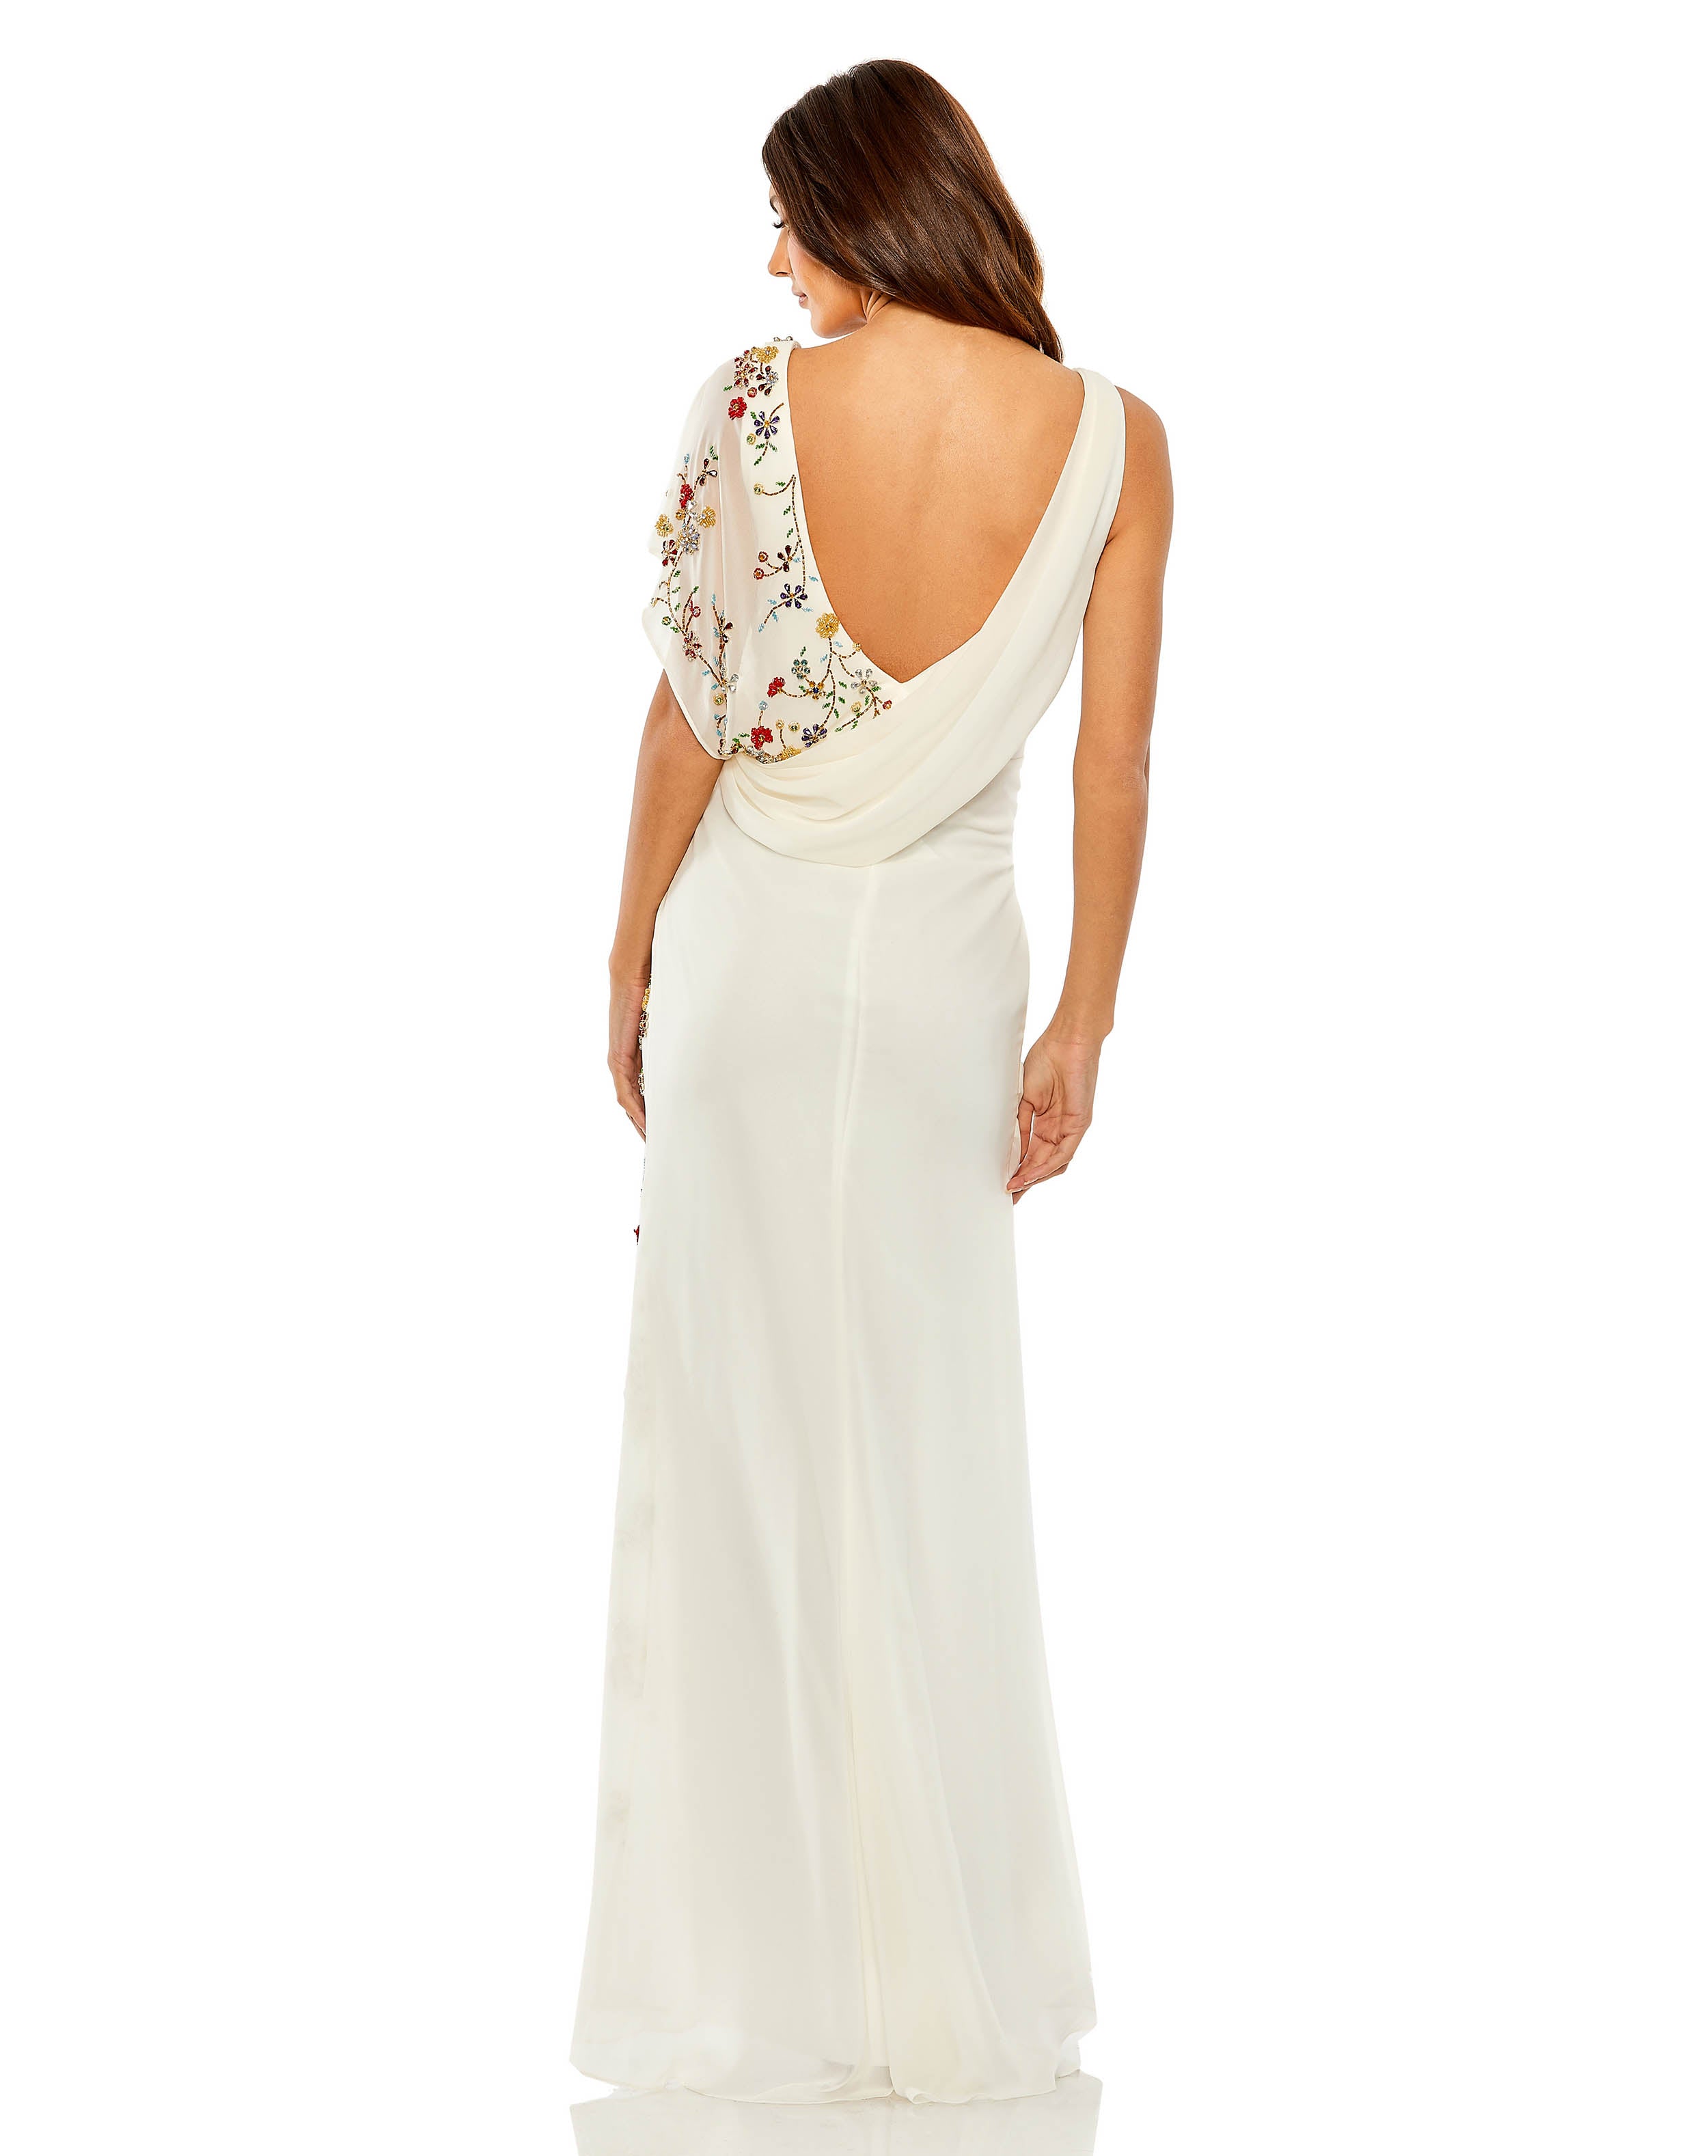 Faux Wrap Multi Colored Beaded Floral Gown | Sample | Sz. 2